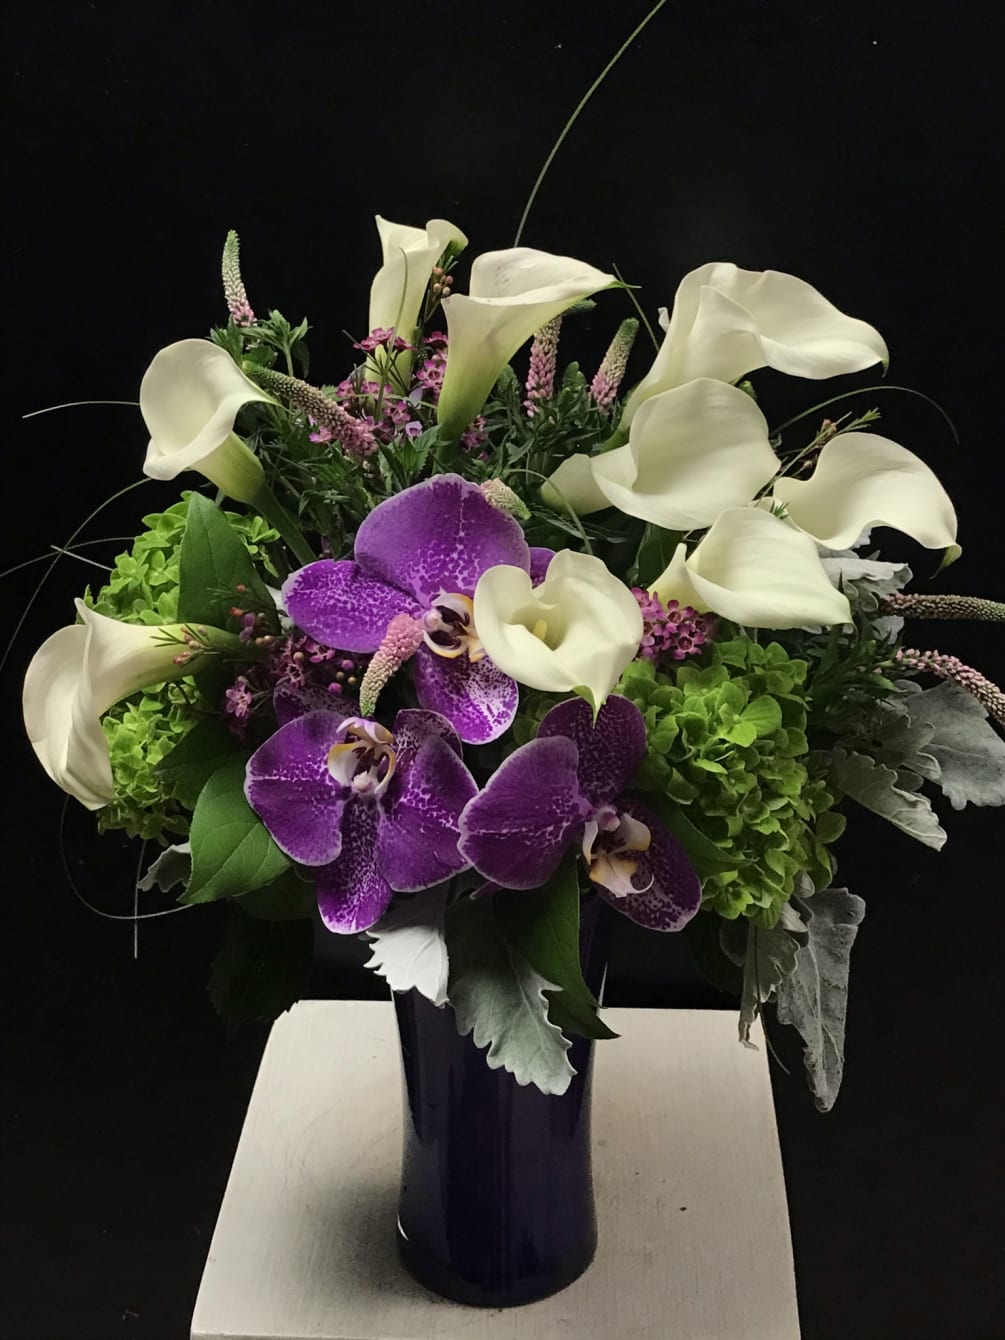 An exquisitely designed arrangement of miniature calla lilies and phalaenopsis orchids. 